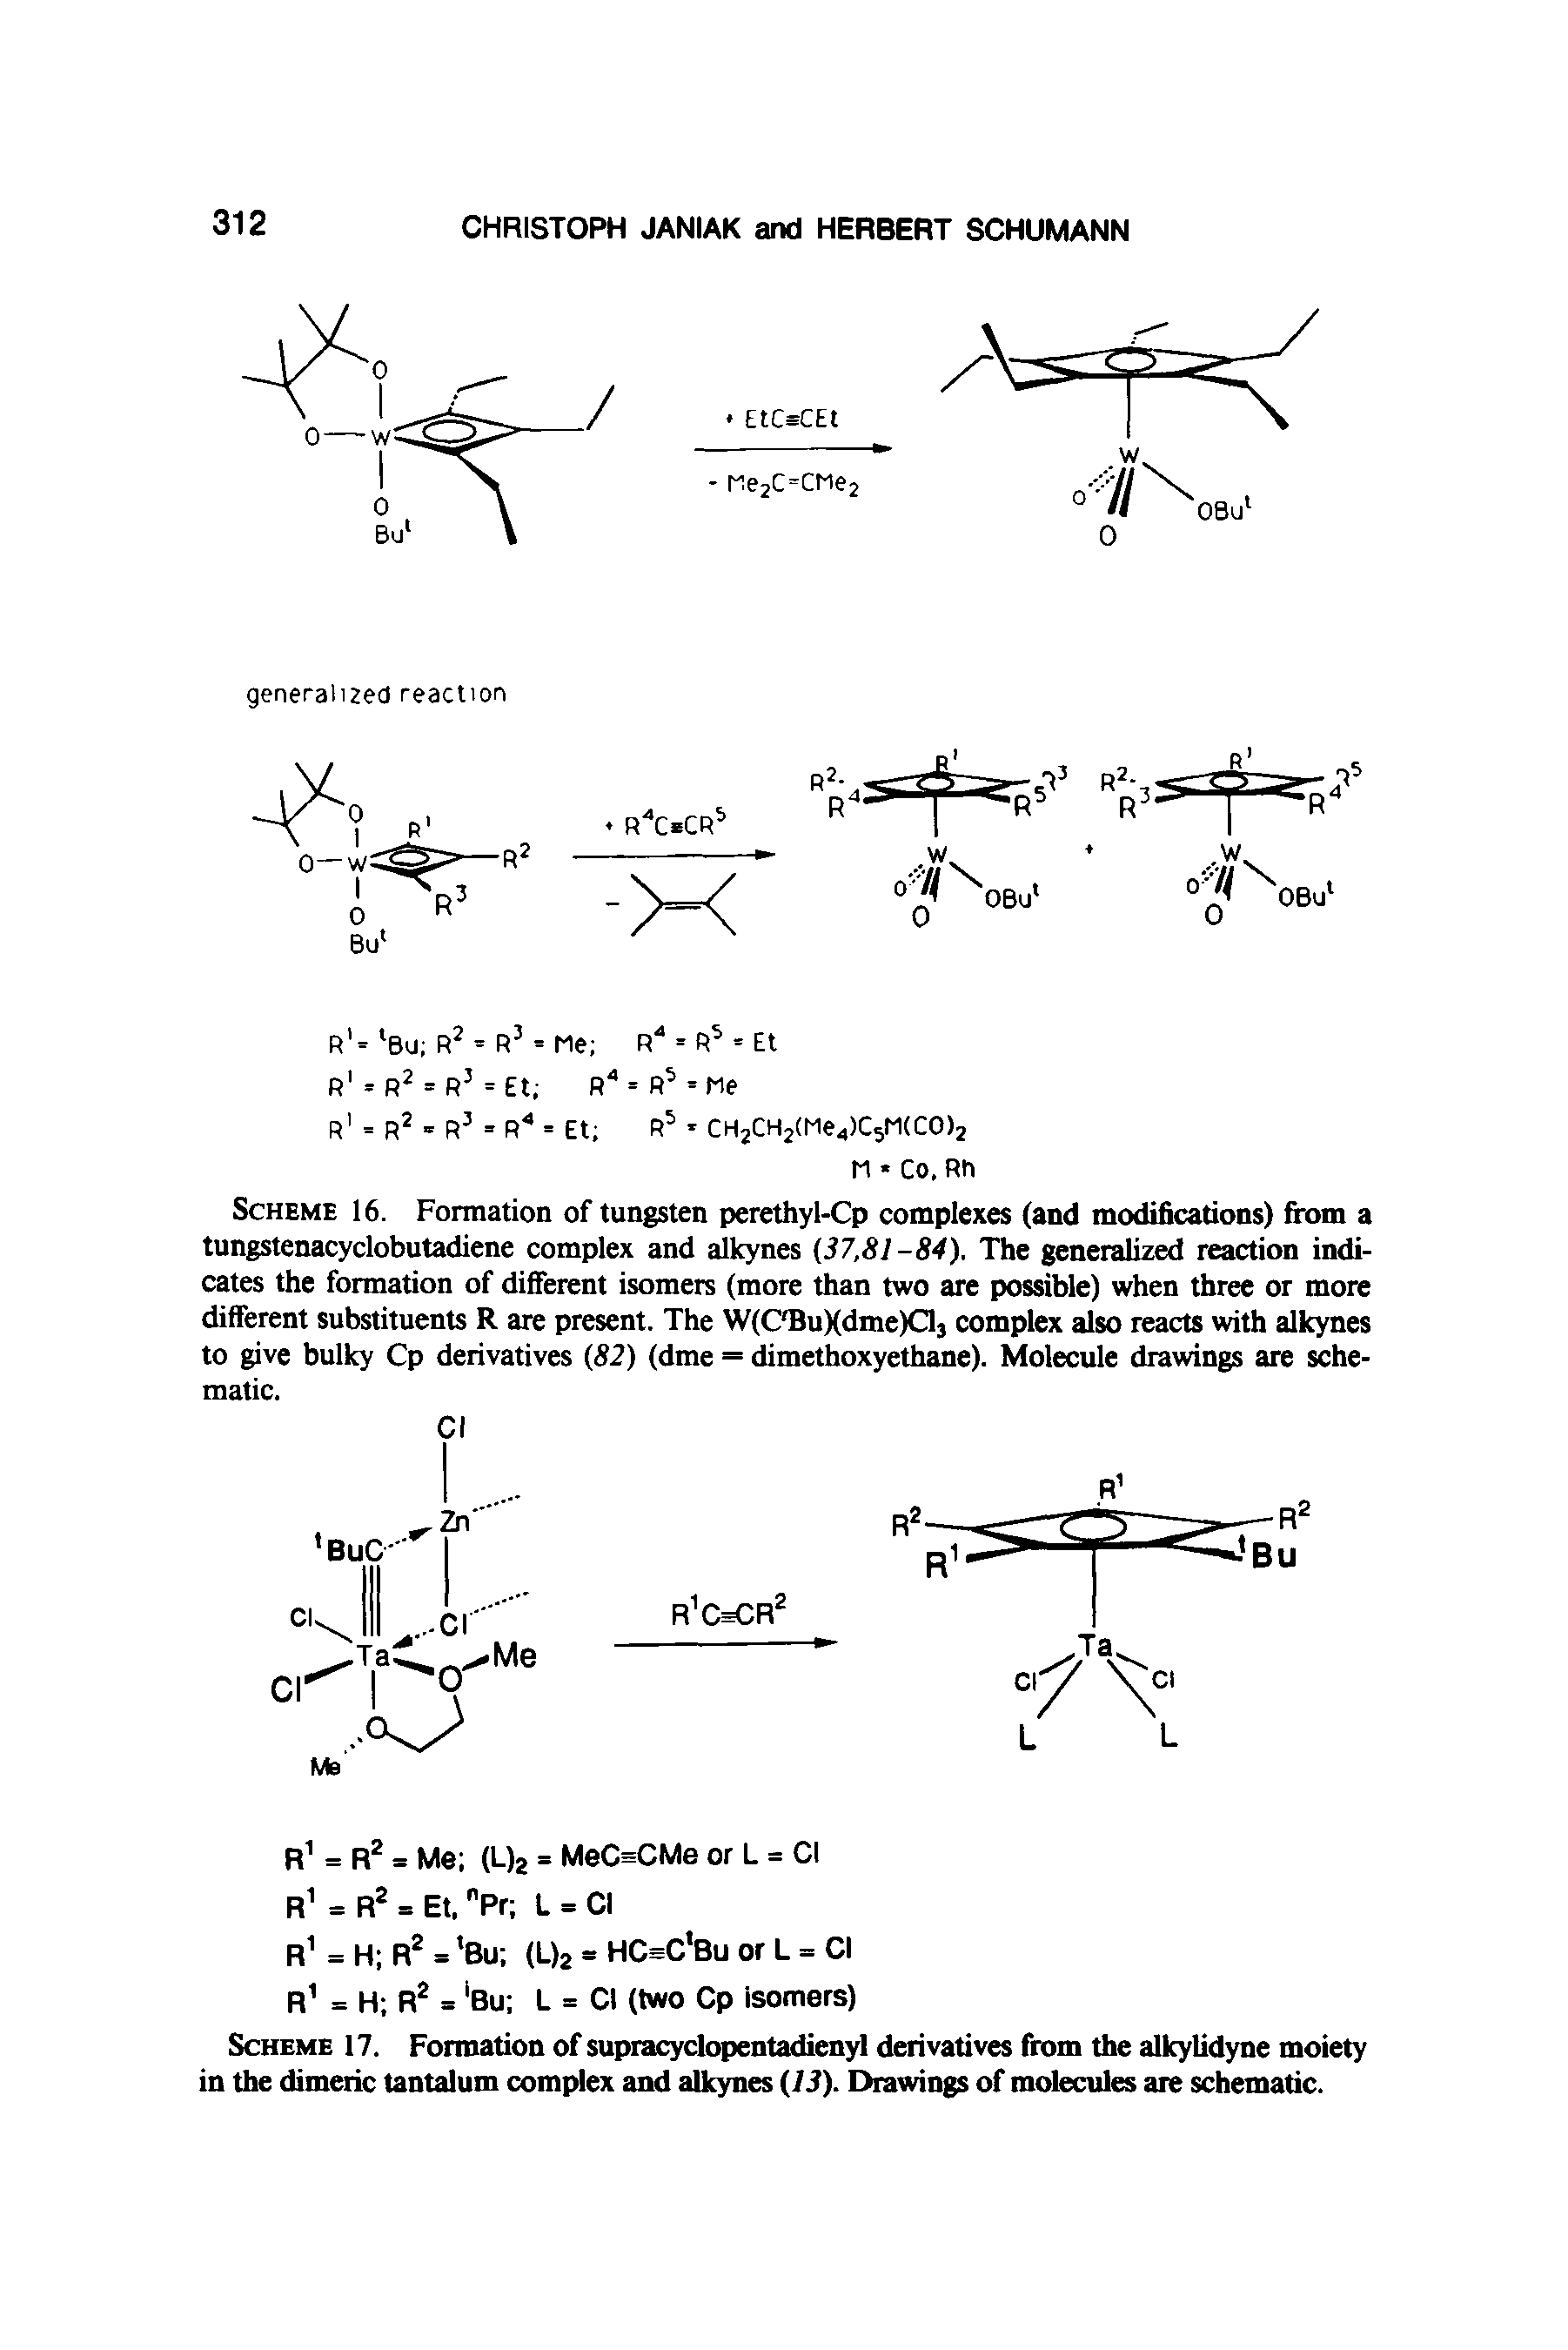 Scheme 16. Formation of tungsten perethyl-Cp complexes (and modifications) from a tungstenacyclobutadiene complex and alkynes (37,81-84). The generalized reaction indicates the formation of different isomers (more than two are possible) when three or more different substituents R are present. The WfC BuXdmeJQj complex also reacts with alkynes to give bulky Cp derivatives (82) (dme = dimethoxyethane). Molecule drawings are schematic.